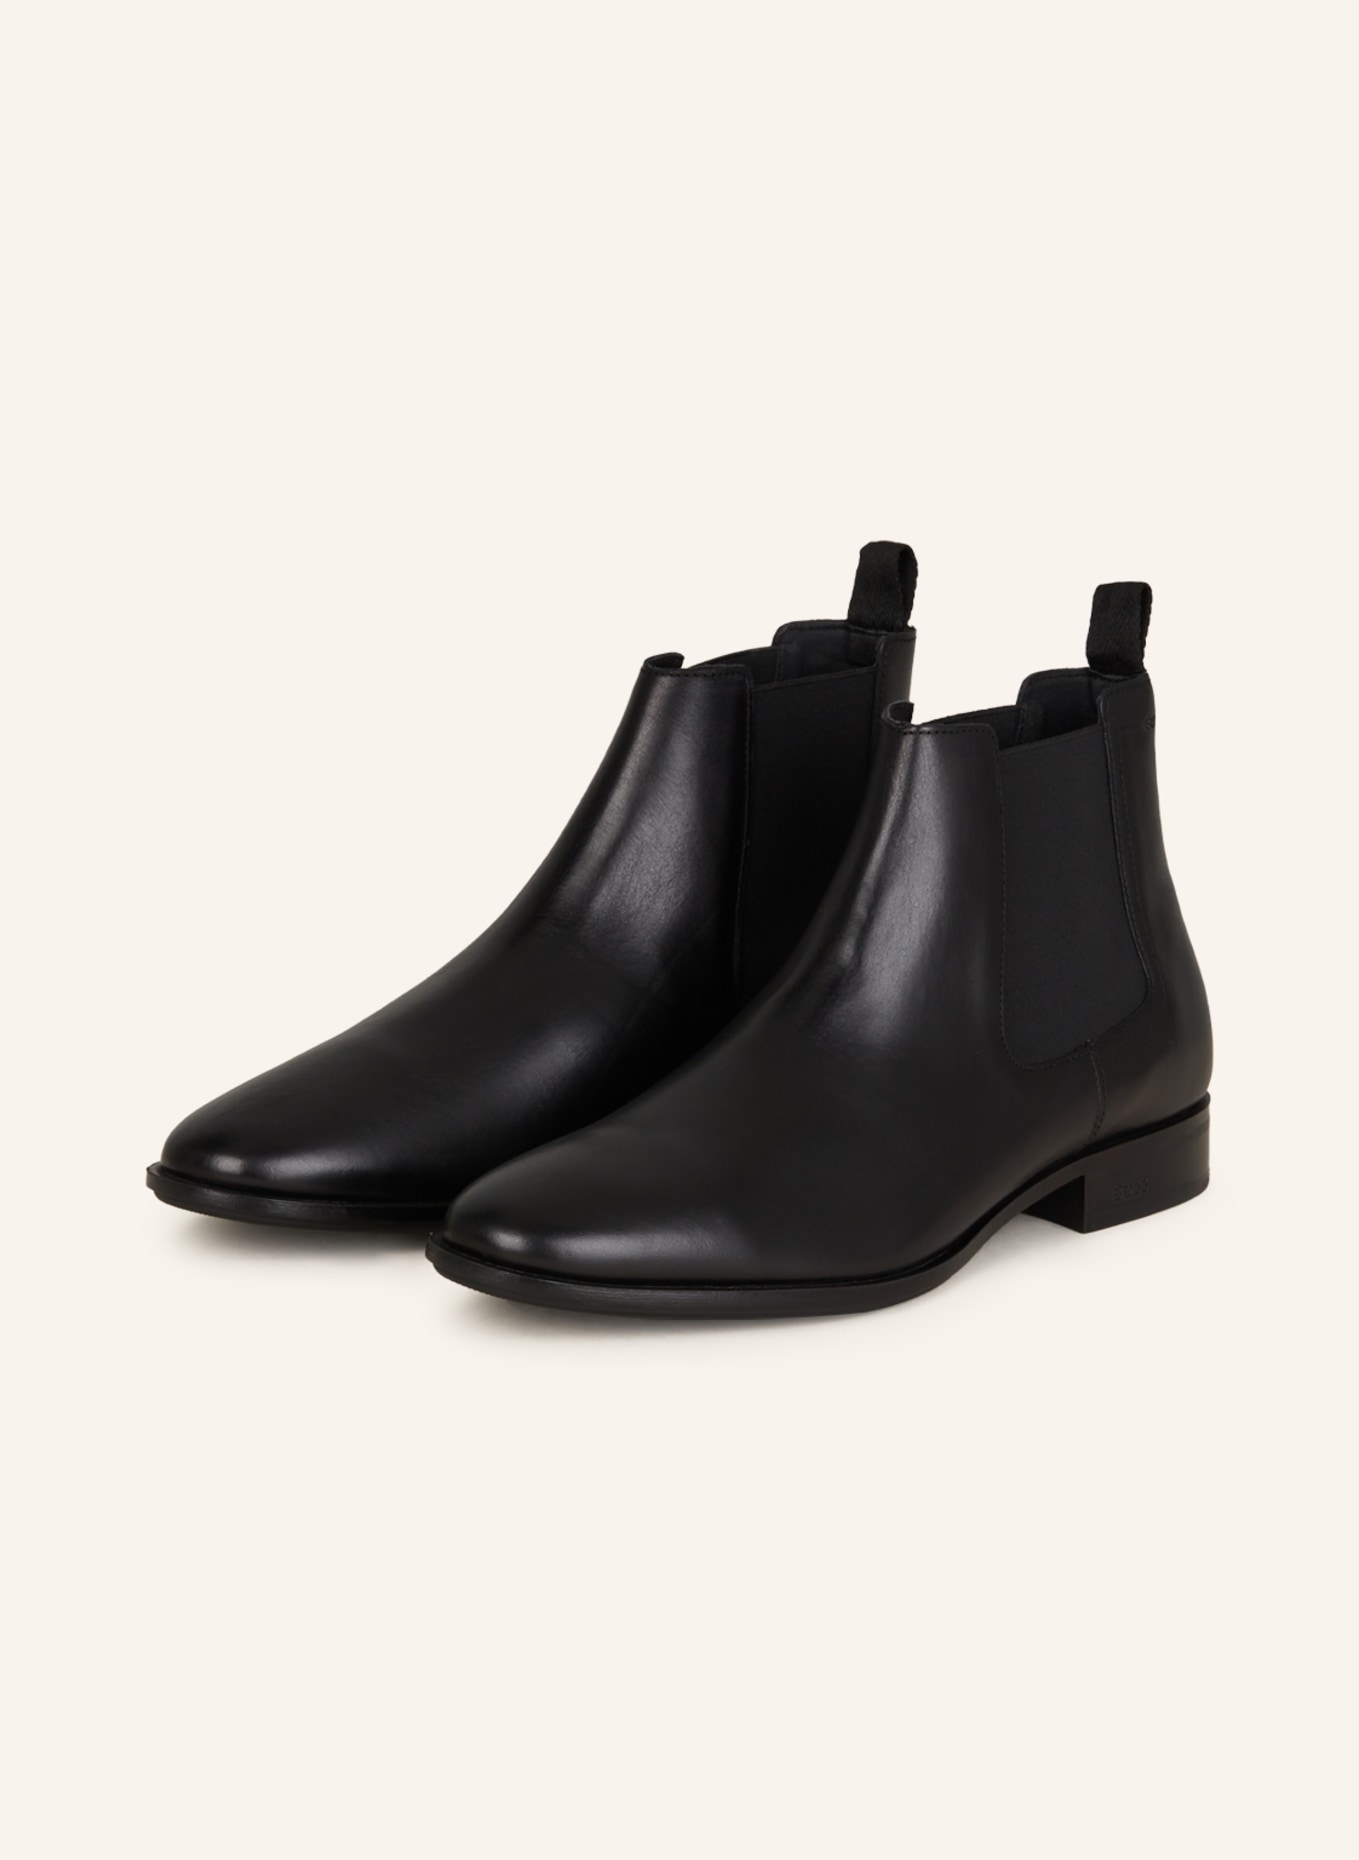 BOSS Chelsea-Boots COLBY CHEB, Farbe: SCHWARZ (Bild 1)